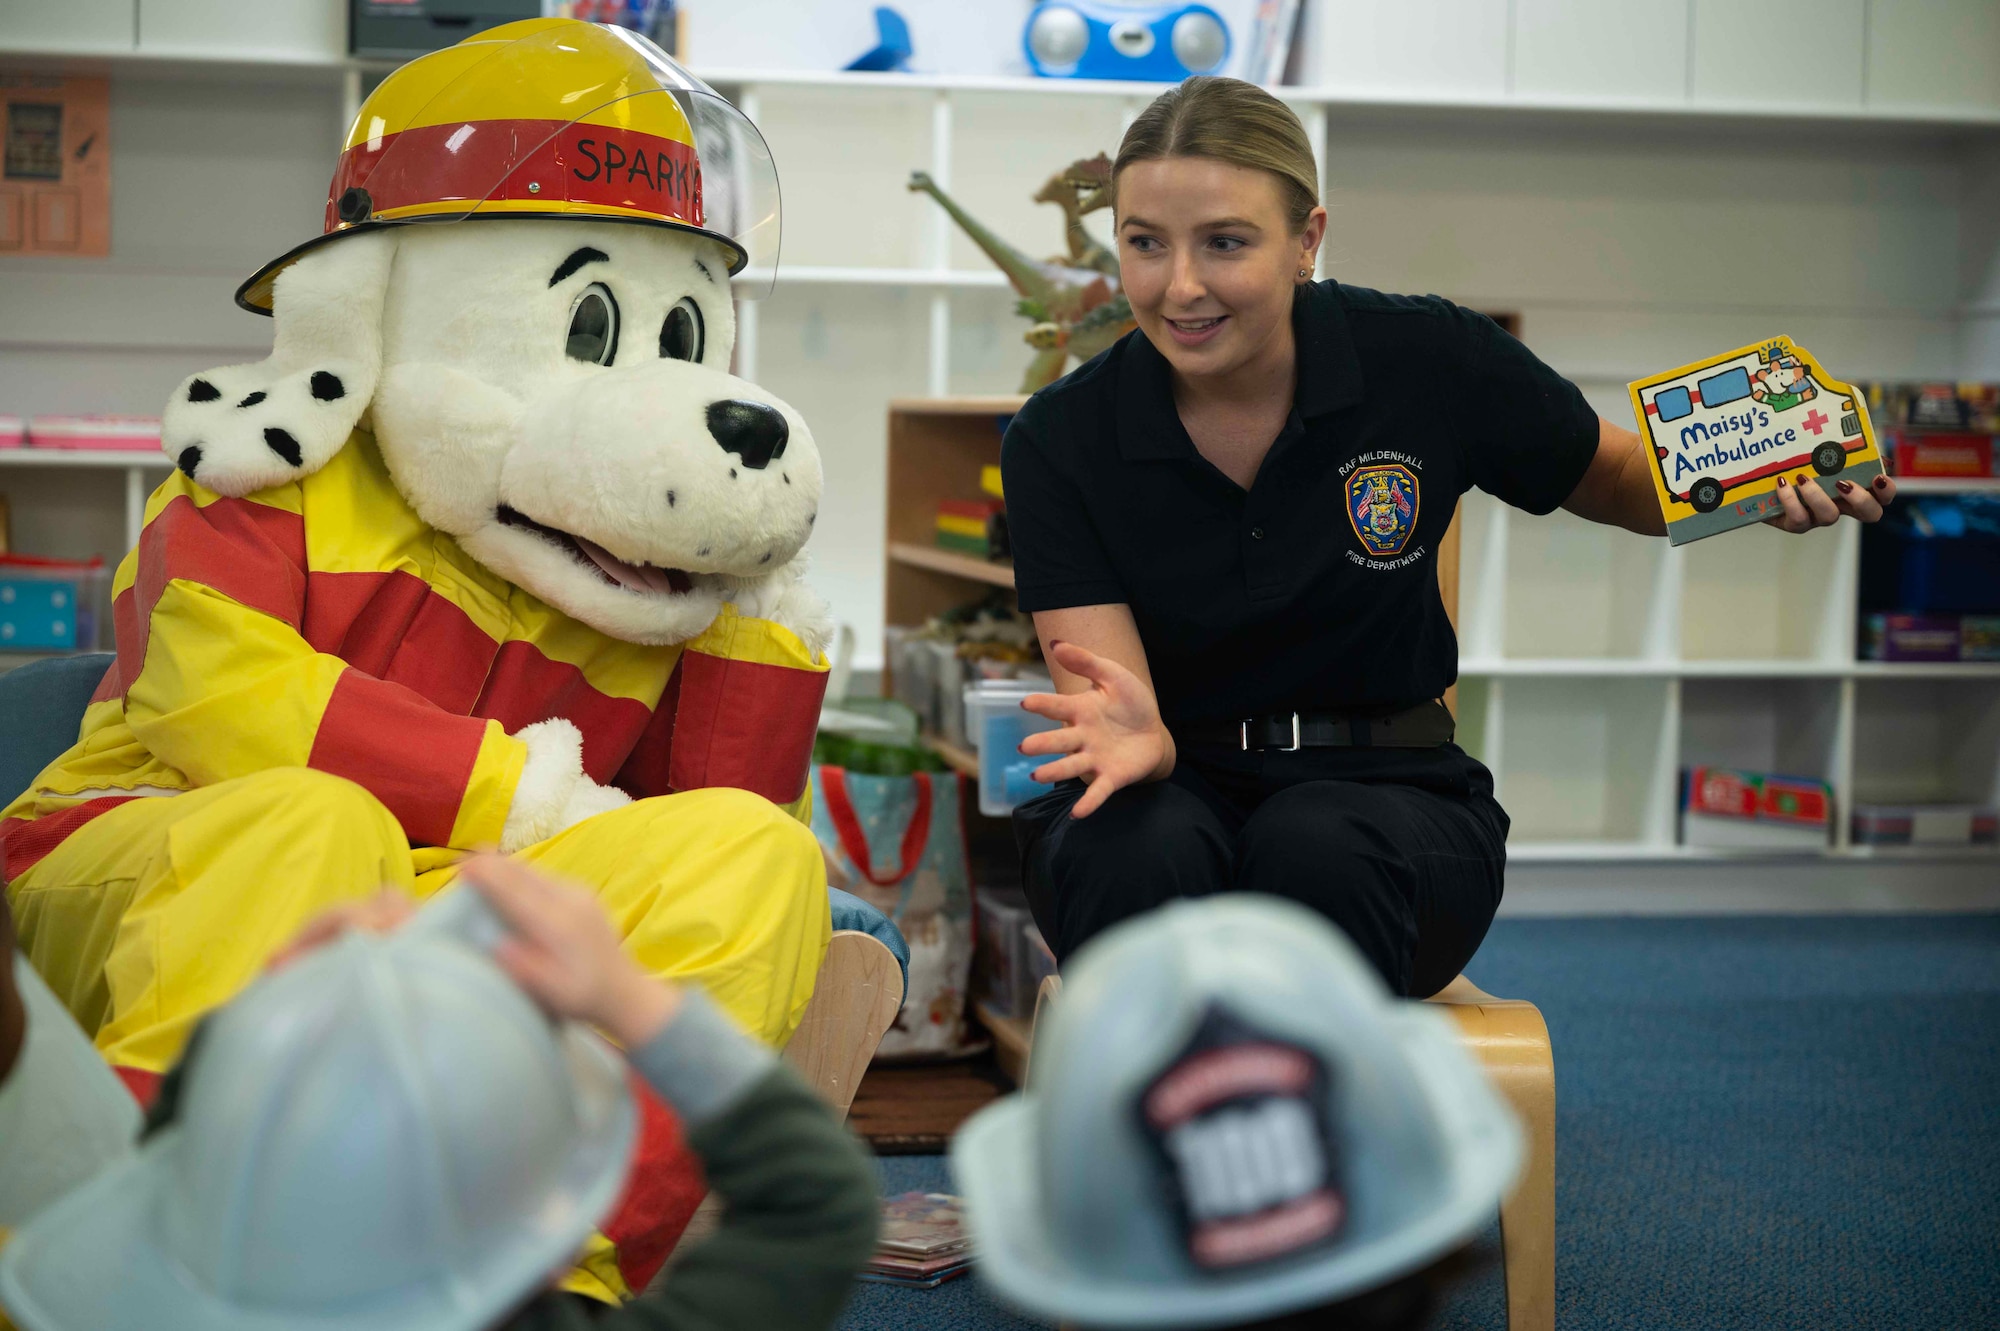 Danielle Petham, 100th Civil Engineer Squadron Fire Department dispatcher, smiles after reading a book about fire safety to a pre-school class at the 100th Force Support Squadron Child Development Center, Royal Air Force Mildenhall, England, Oct. 11, 2023. As part of fire prevention week, Sparky the Fire Dog and members of the 100th CES educated children about fire safety, protecting military families and increasing morale. (U.S. Air Force photo by Senior Airman Viviam Chiu)